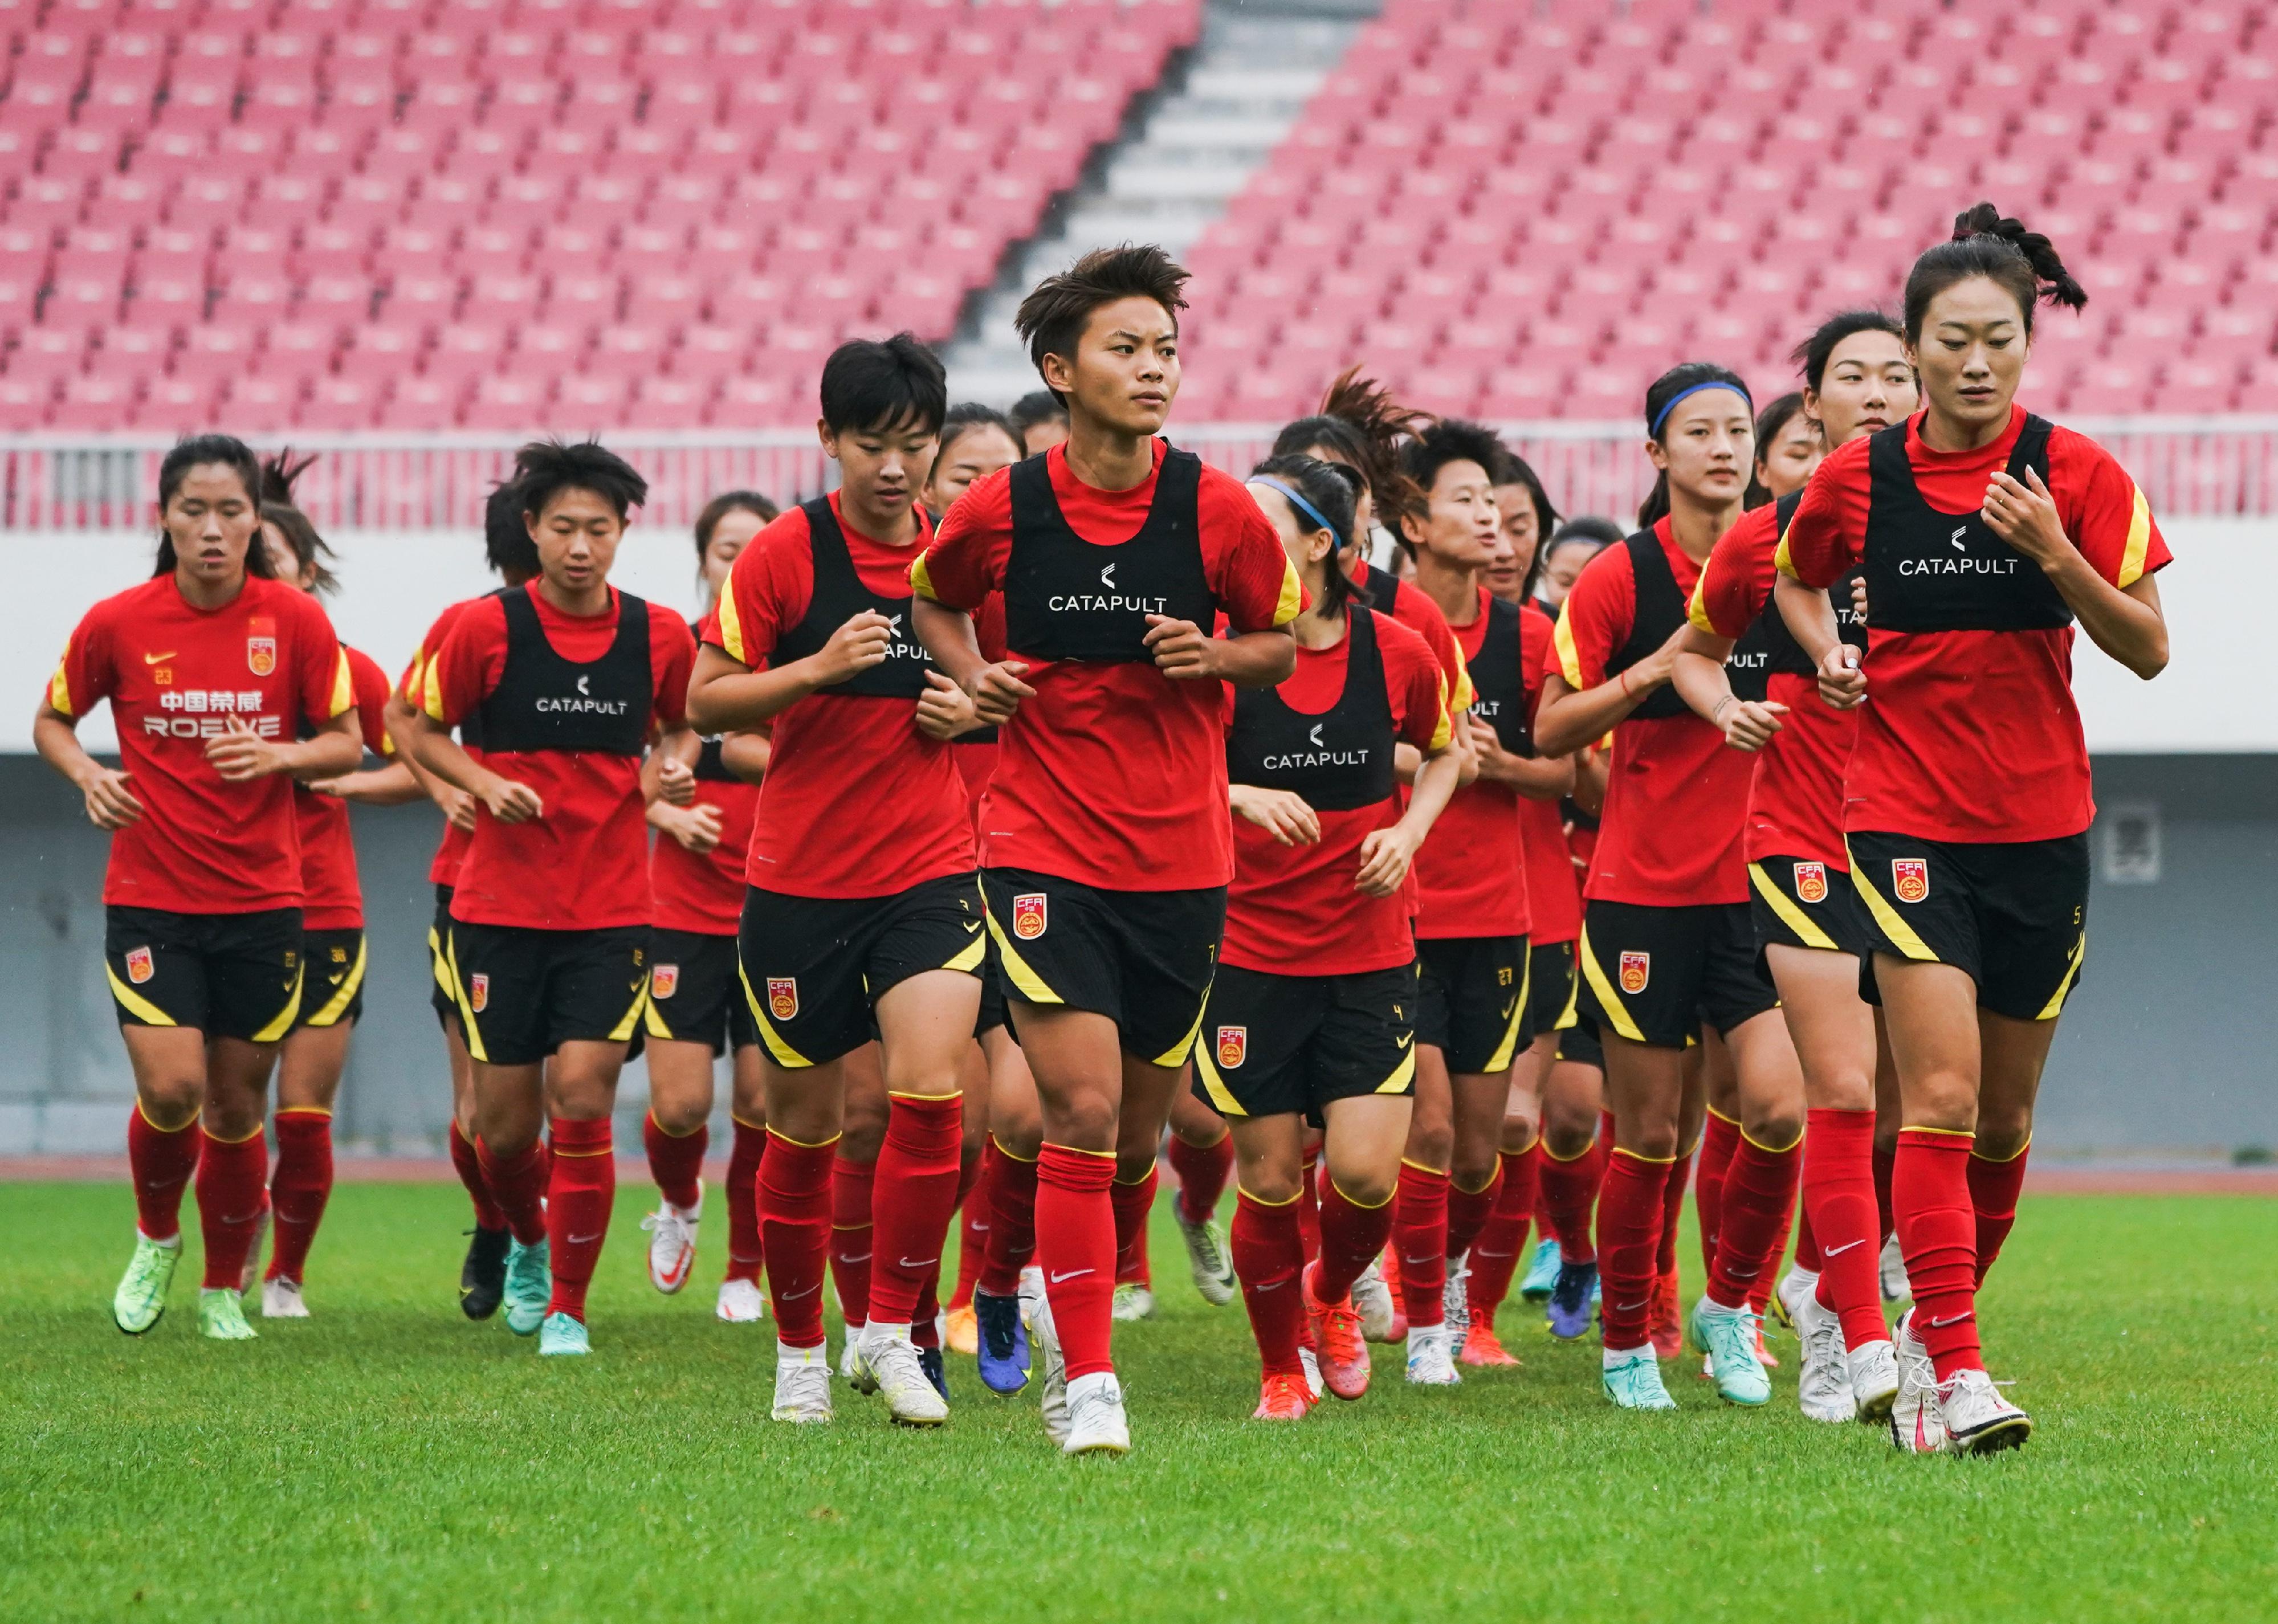 Players of China Women's National Football Team attend a training session ahead of the East Asian Football Federation.